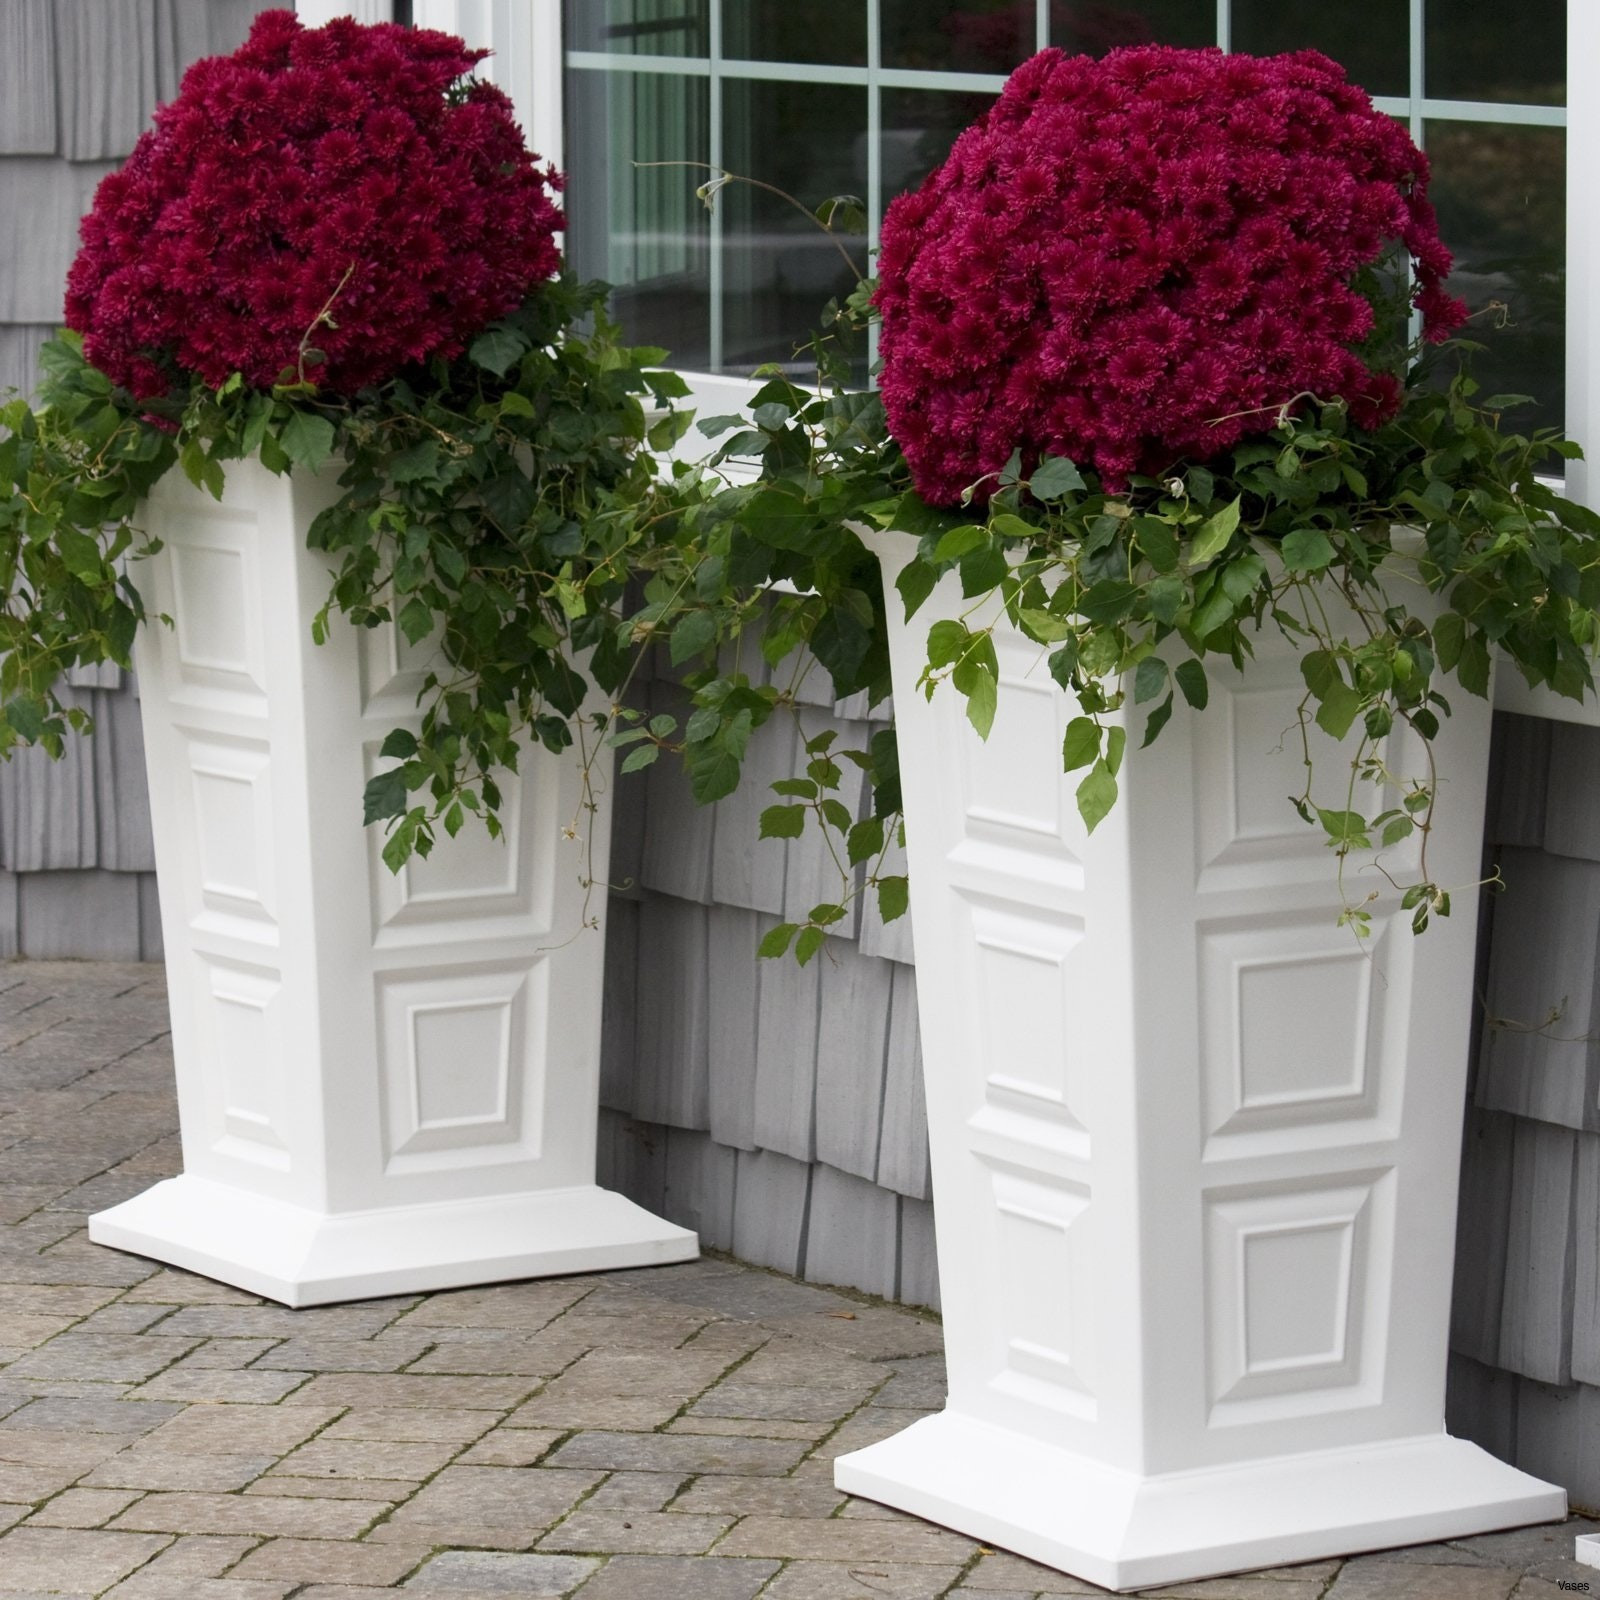 10 Cute Grave Vases for Flowers 2024 free download grave vases for flowers of flower pot ideas baolihf com regarding 39 beautiful decorative flower pots inspiration outdoor plant stand ideas